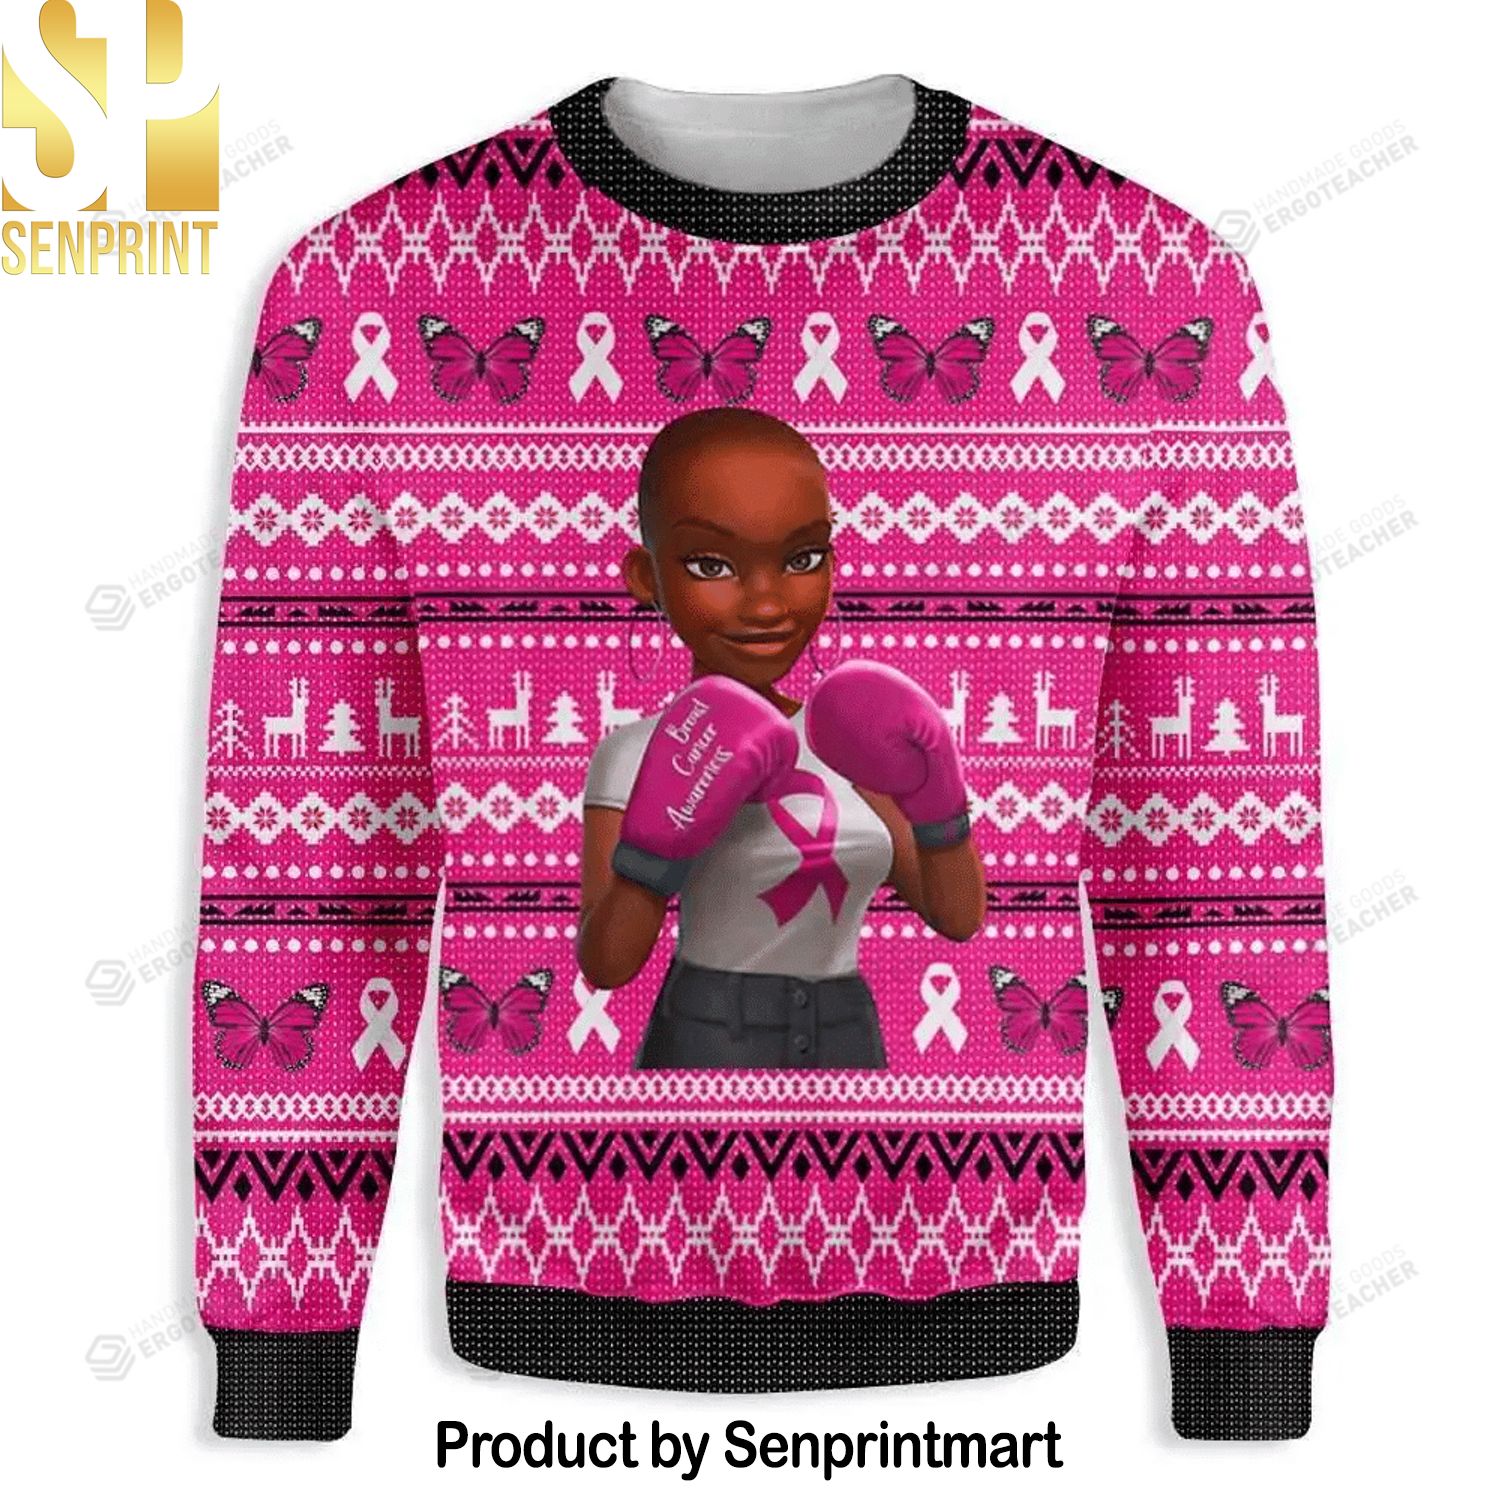 CITYBARKS Black Girl Breast Cancer Awareness Knitting Pattern Ugly Christmas Sweater